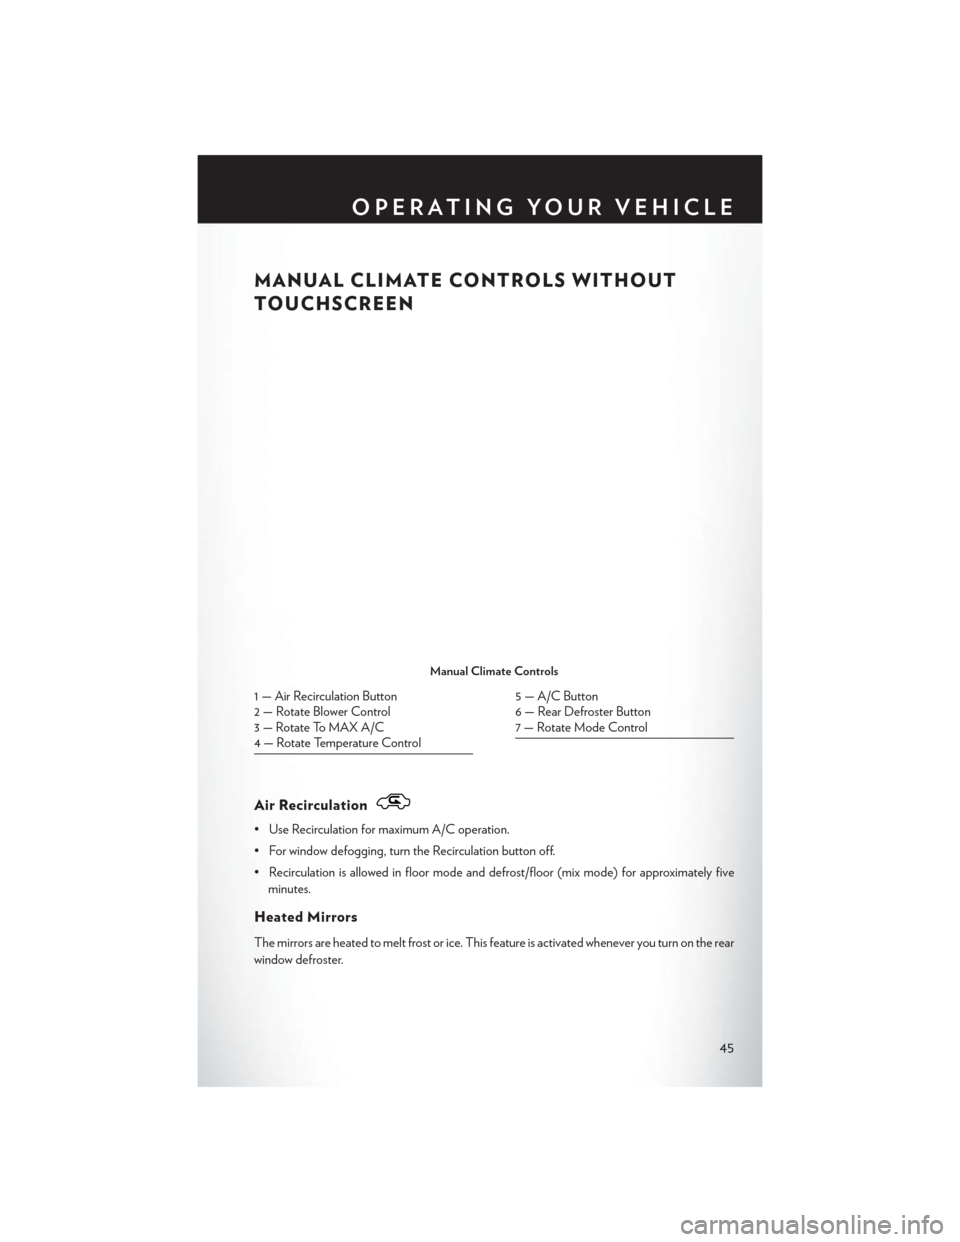 CHRYSLER 200 2015 2.G User Guide MANUAL CLIMATE CONTROLS WITHOUT
TOUCHSCREEN
Air Recirculation
• Use Recirculation for maximum A/C operation.
• For window defogging, turn the Recirculation button off.
• Recirculation is allowed